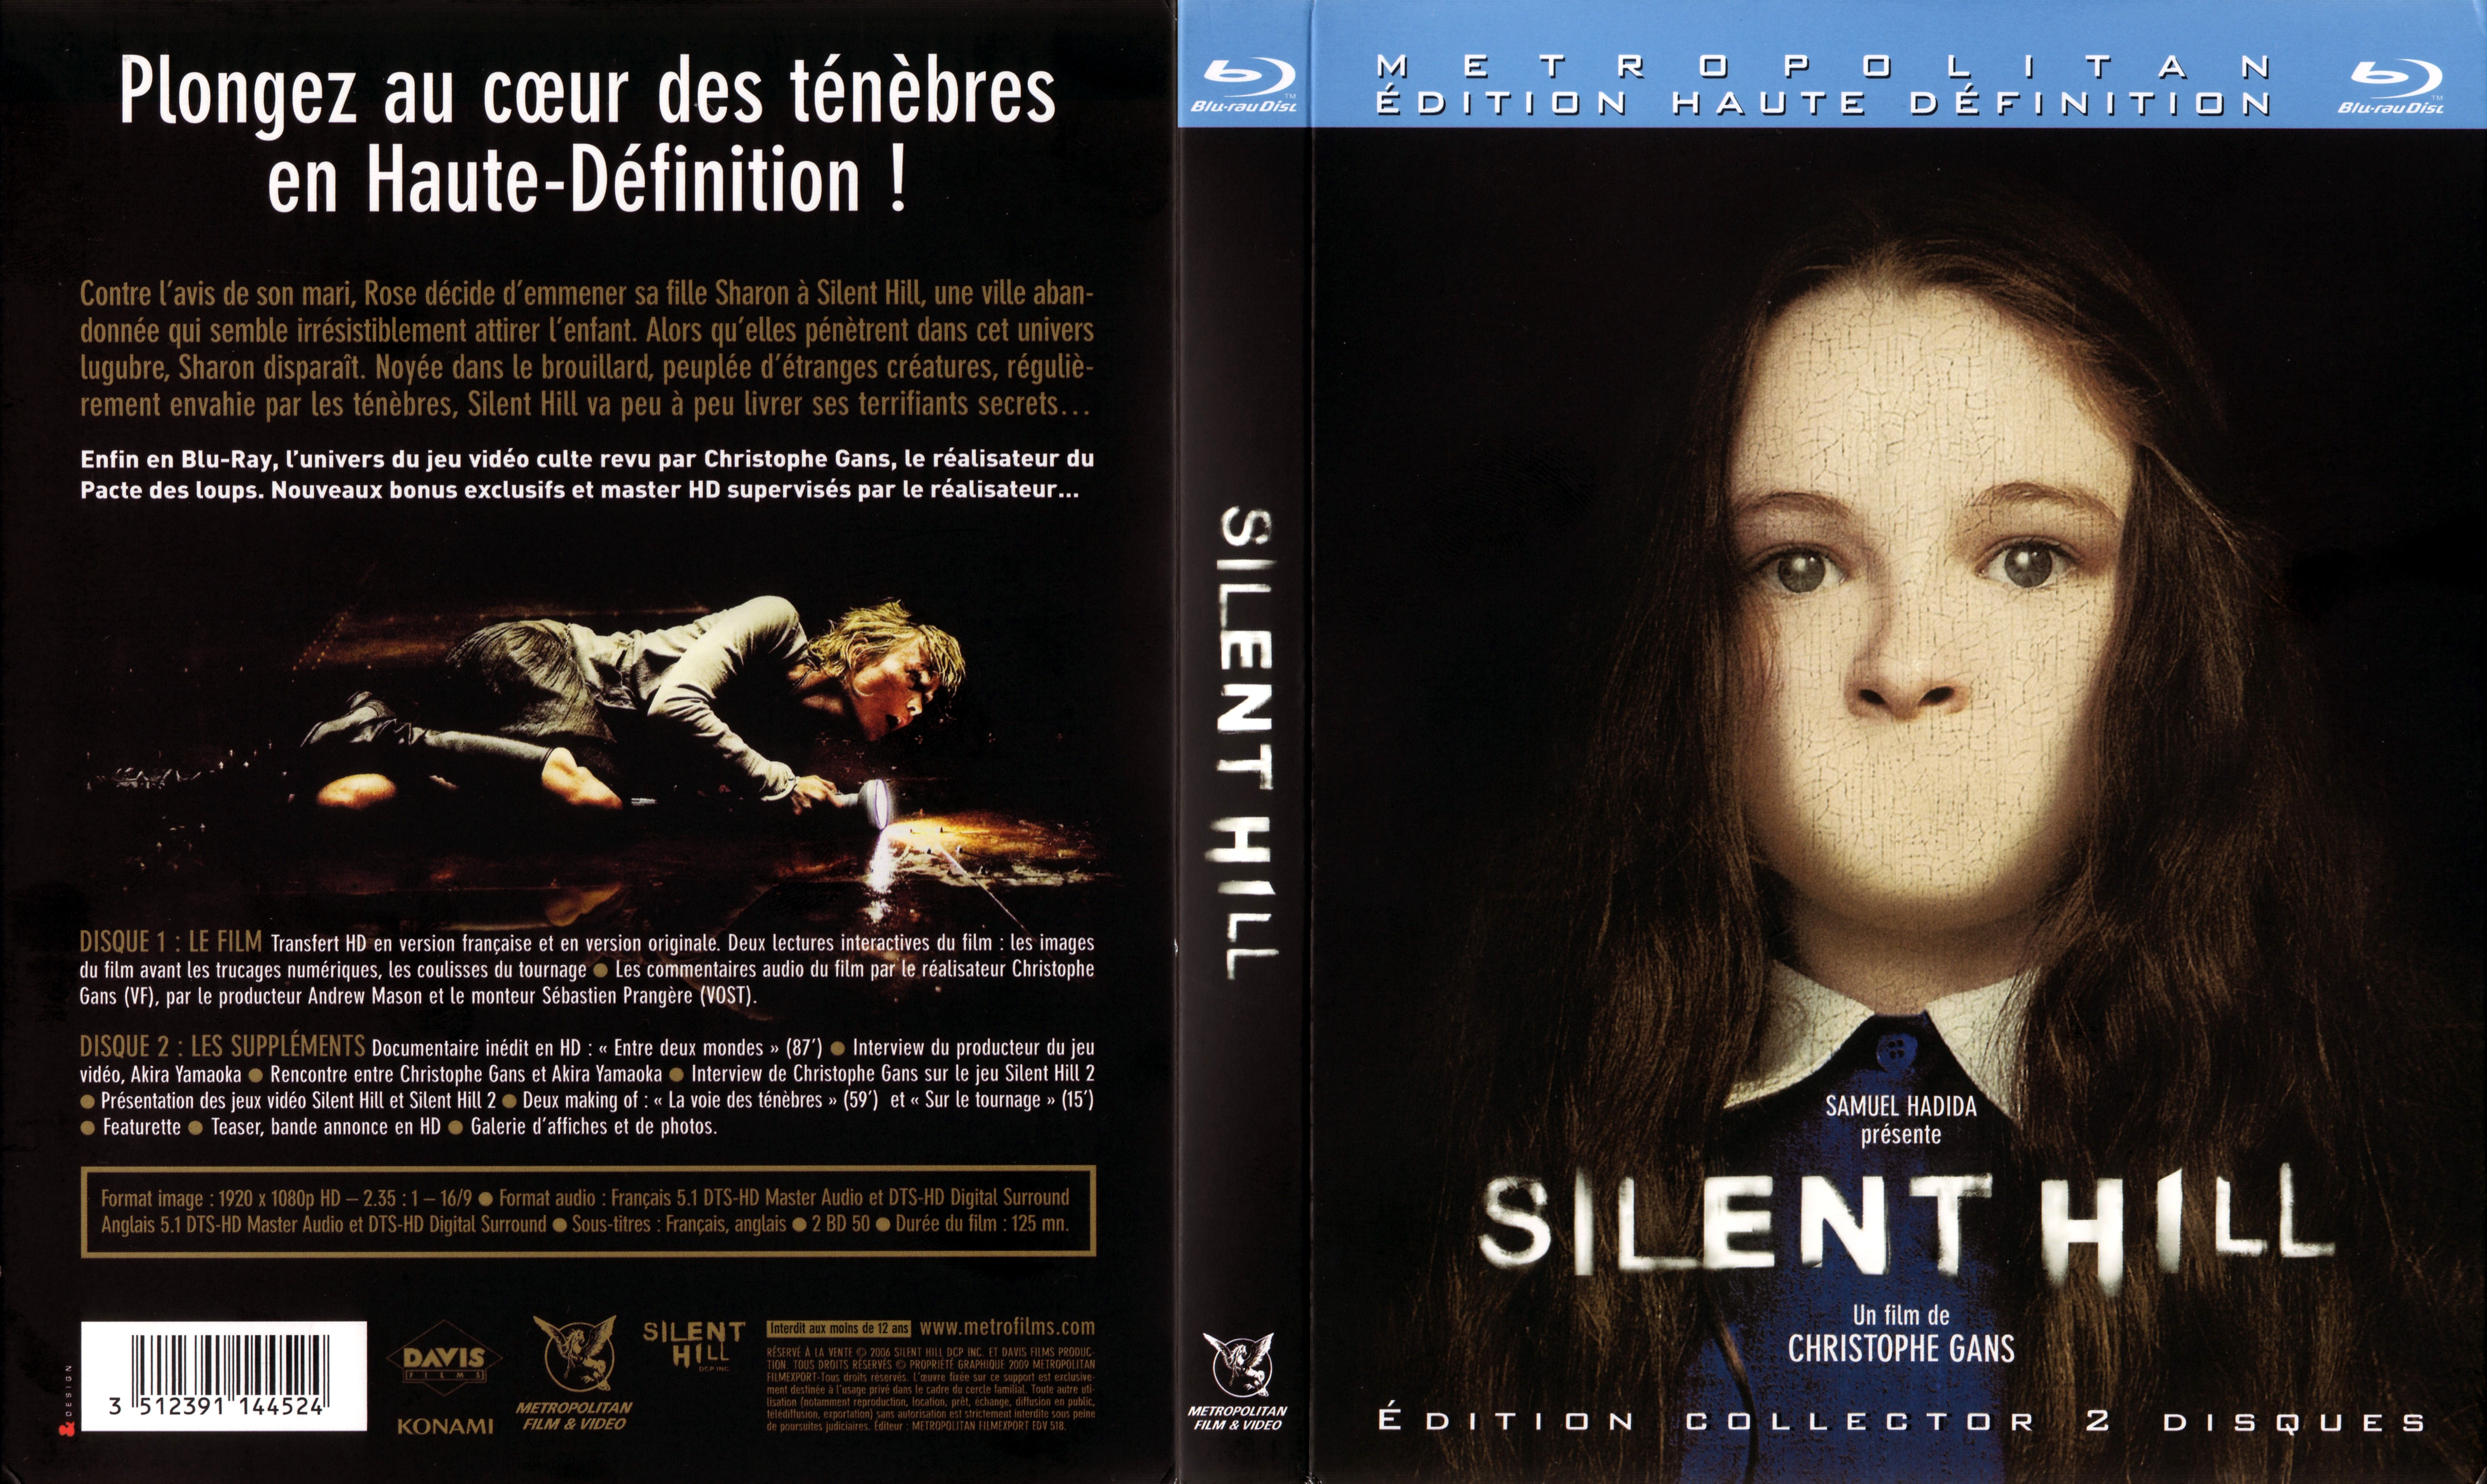 Jaquette DVD Silent Hill (BLU-RAY) v5